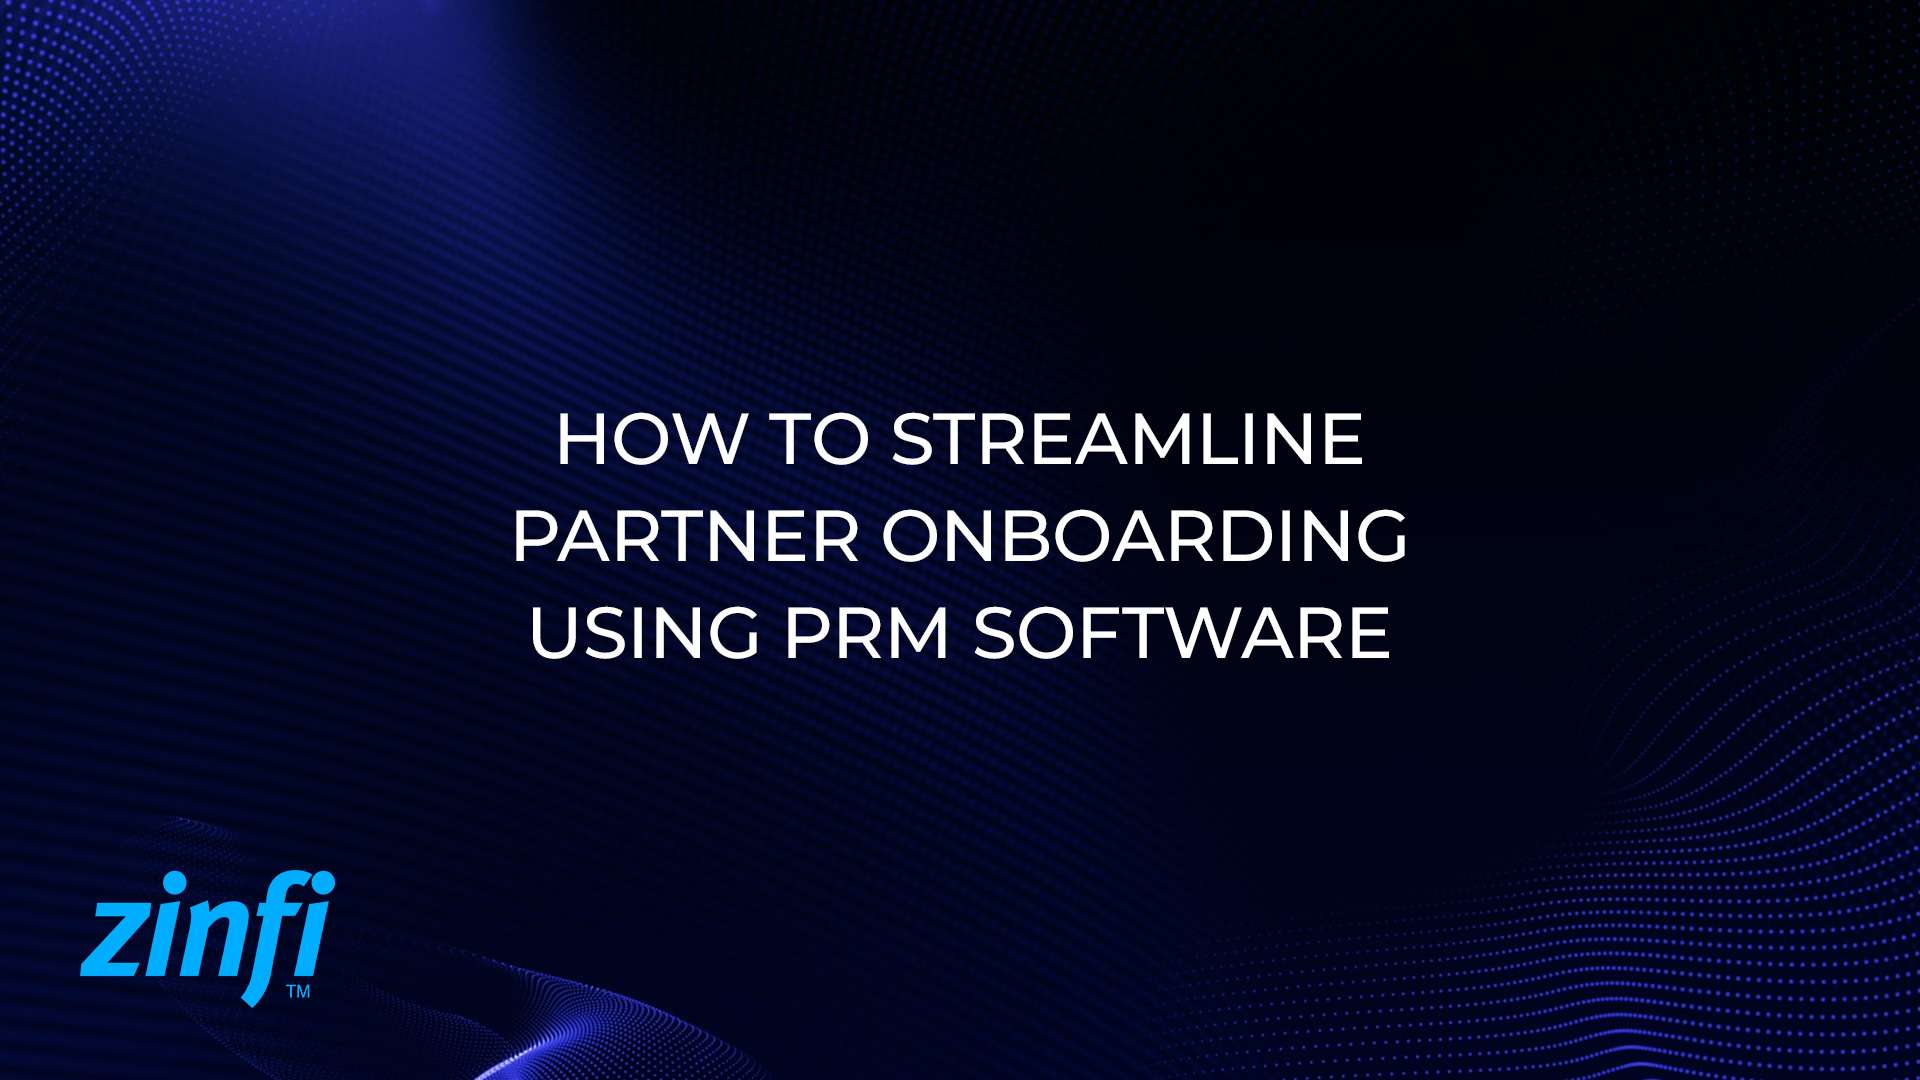 How to Streamline Partner Onboarding Using PRM Software